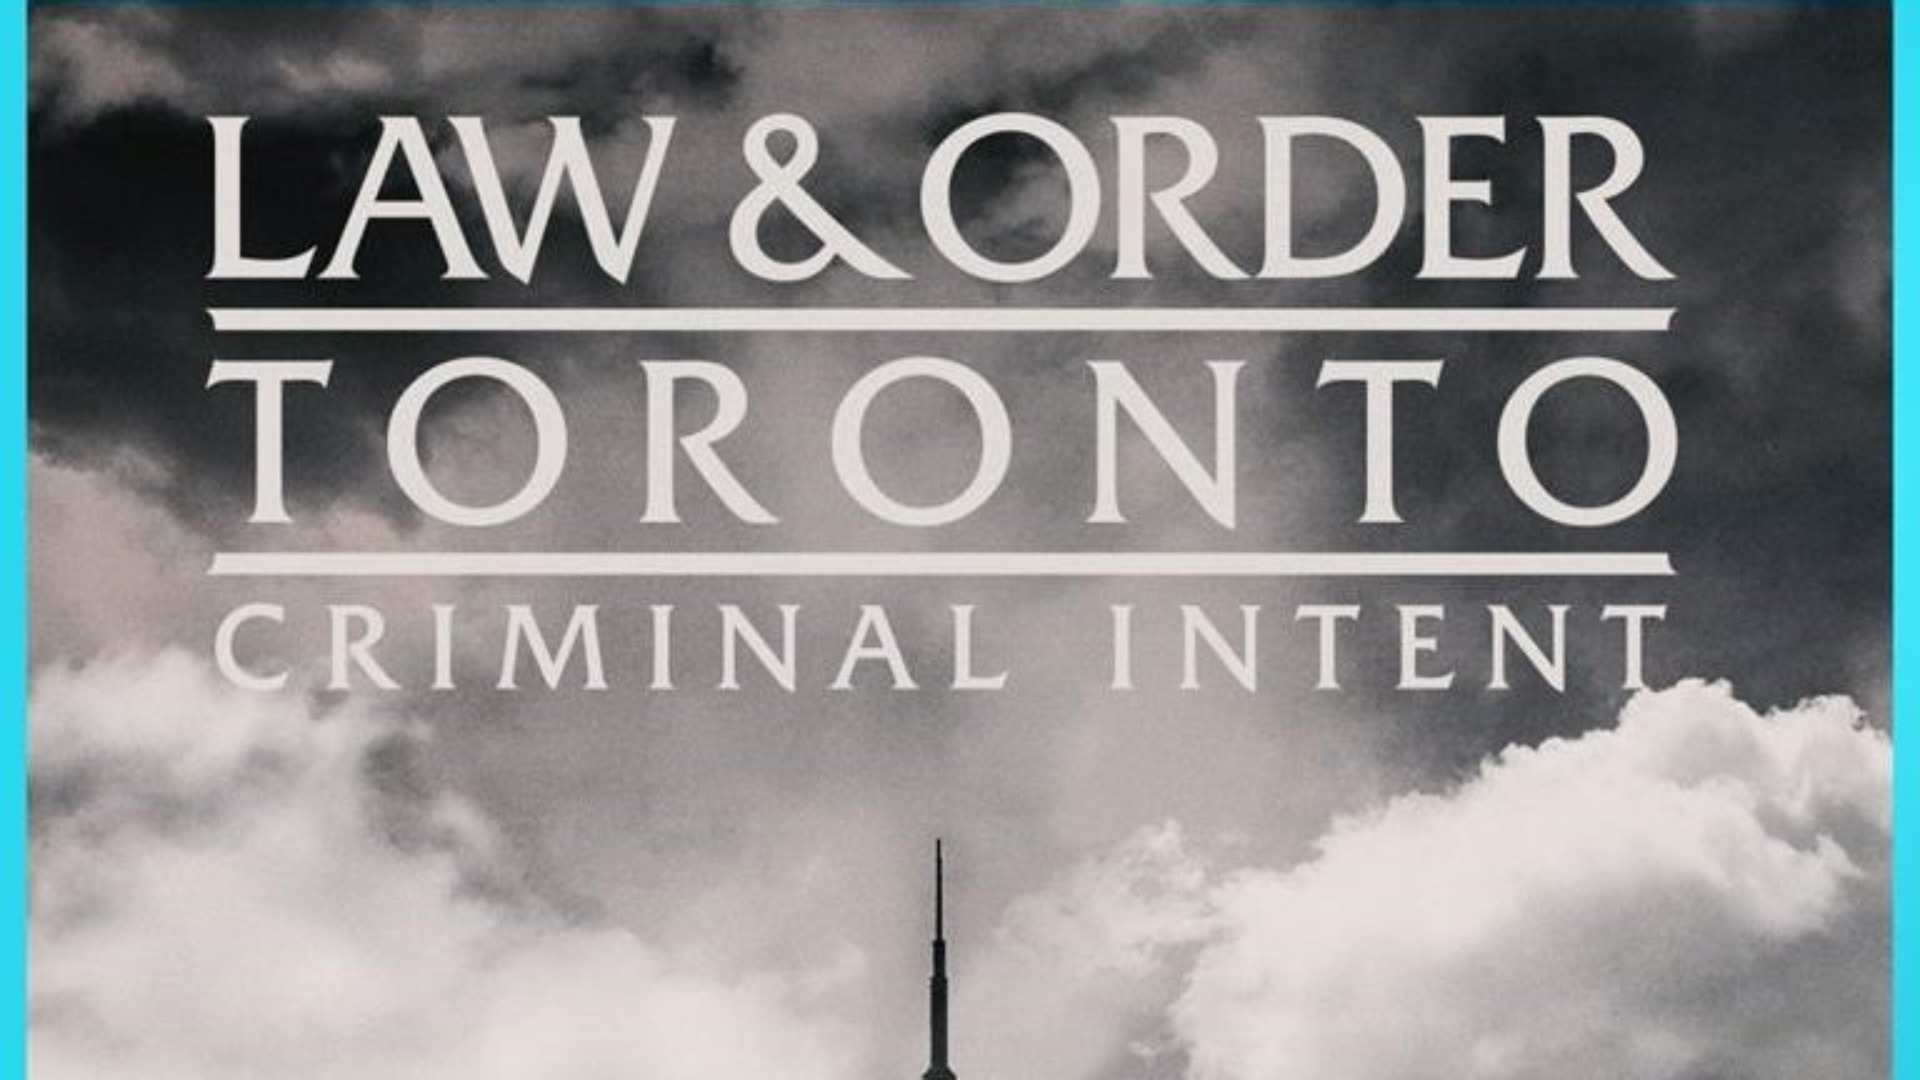 ‘Law & Order’ is coming to Toronto – and we have the details